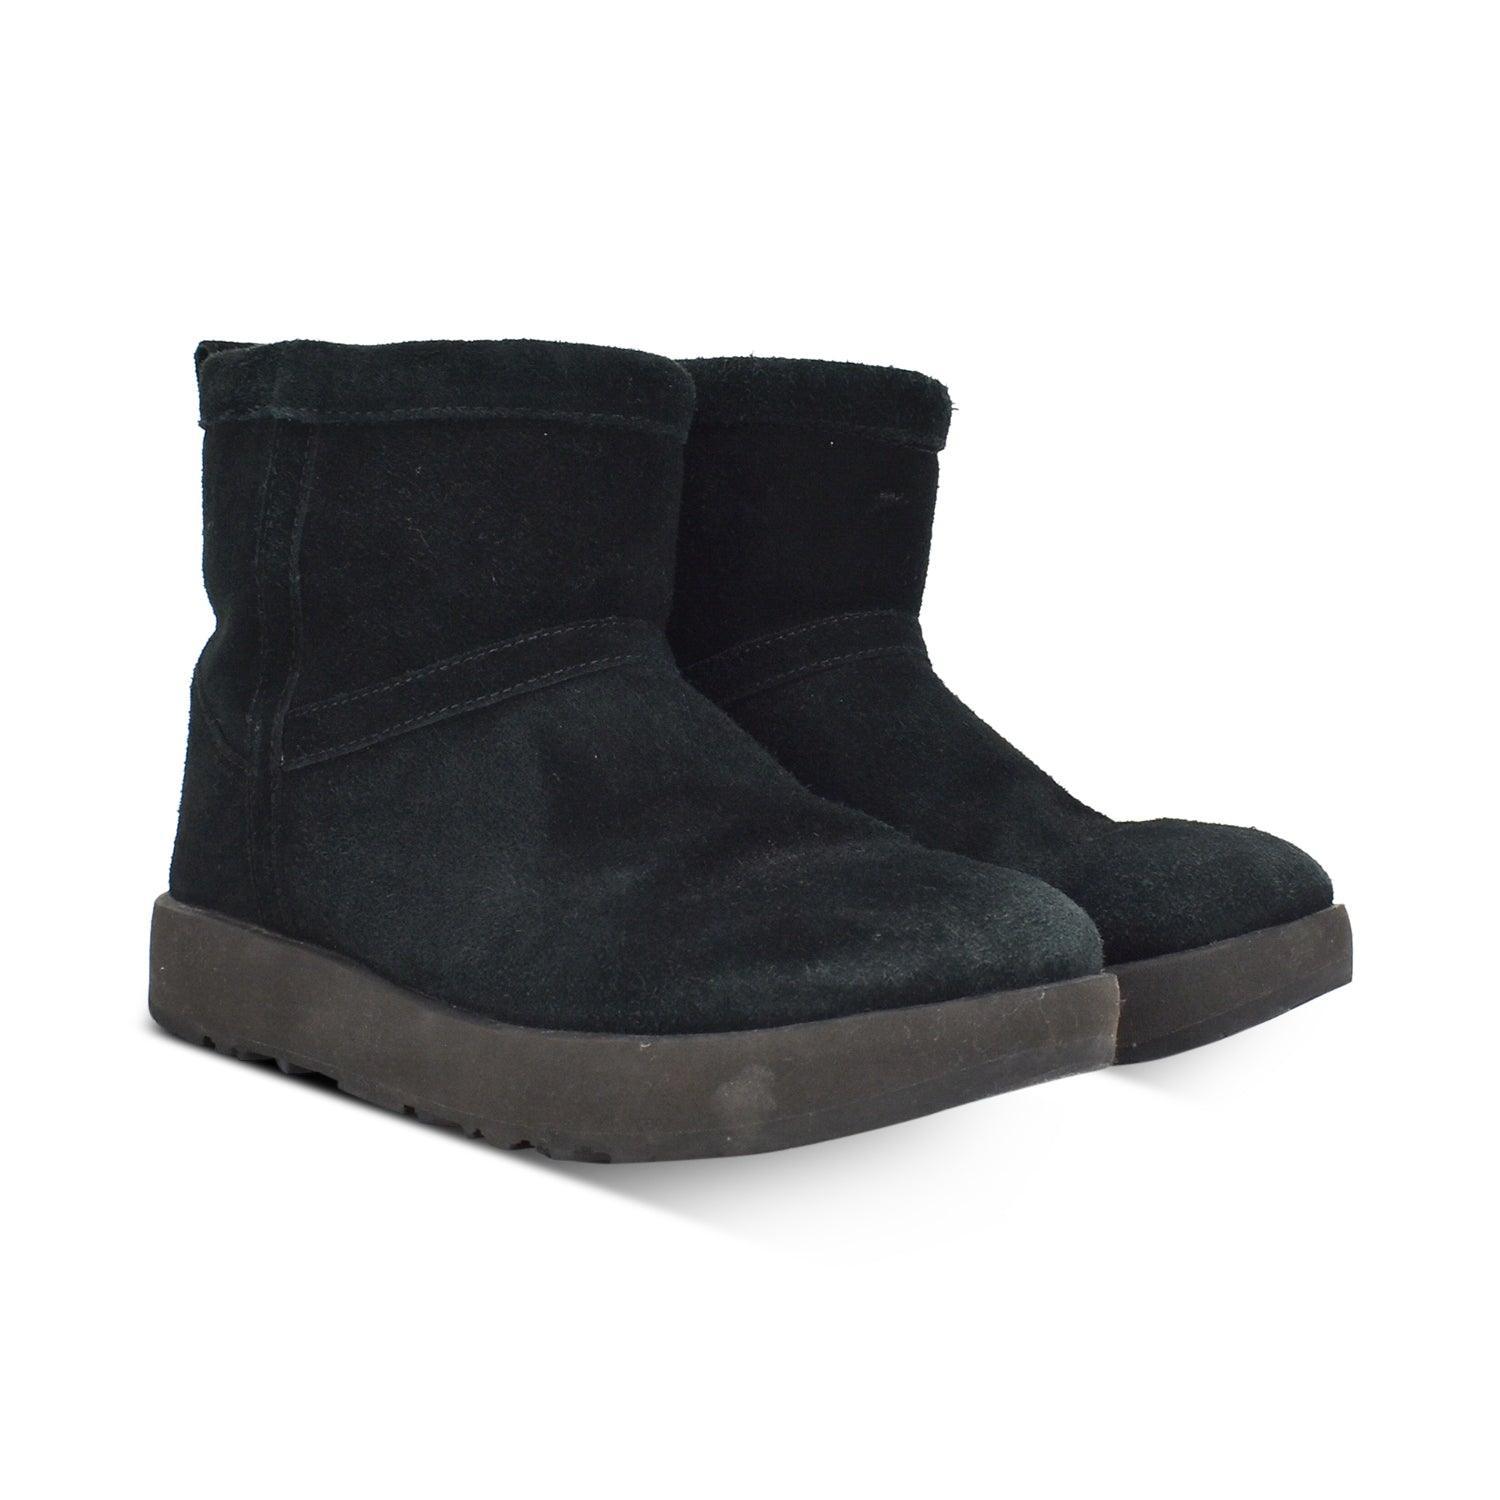 Ugg 'Mini 2' Boots - Women's 7 - Fashionably Yours